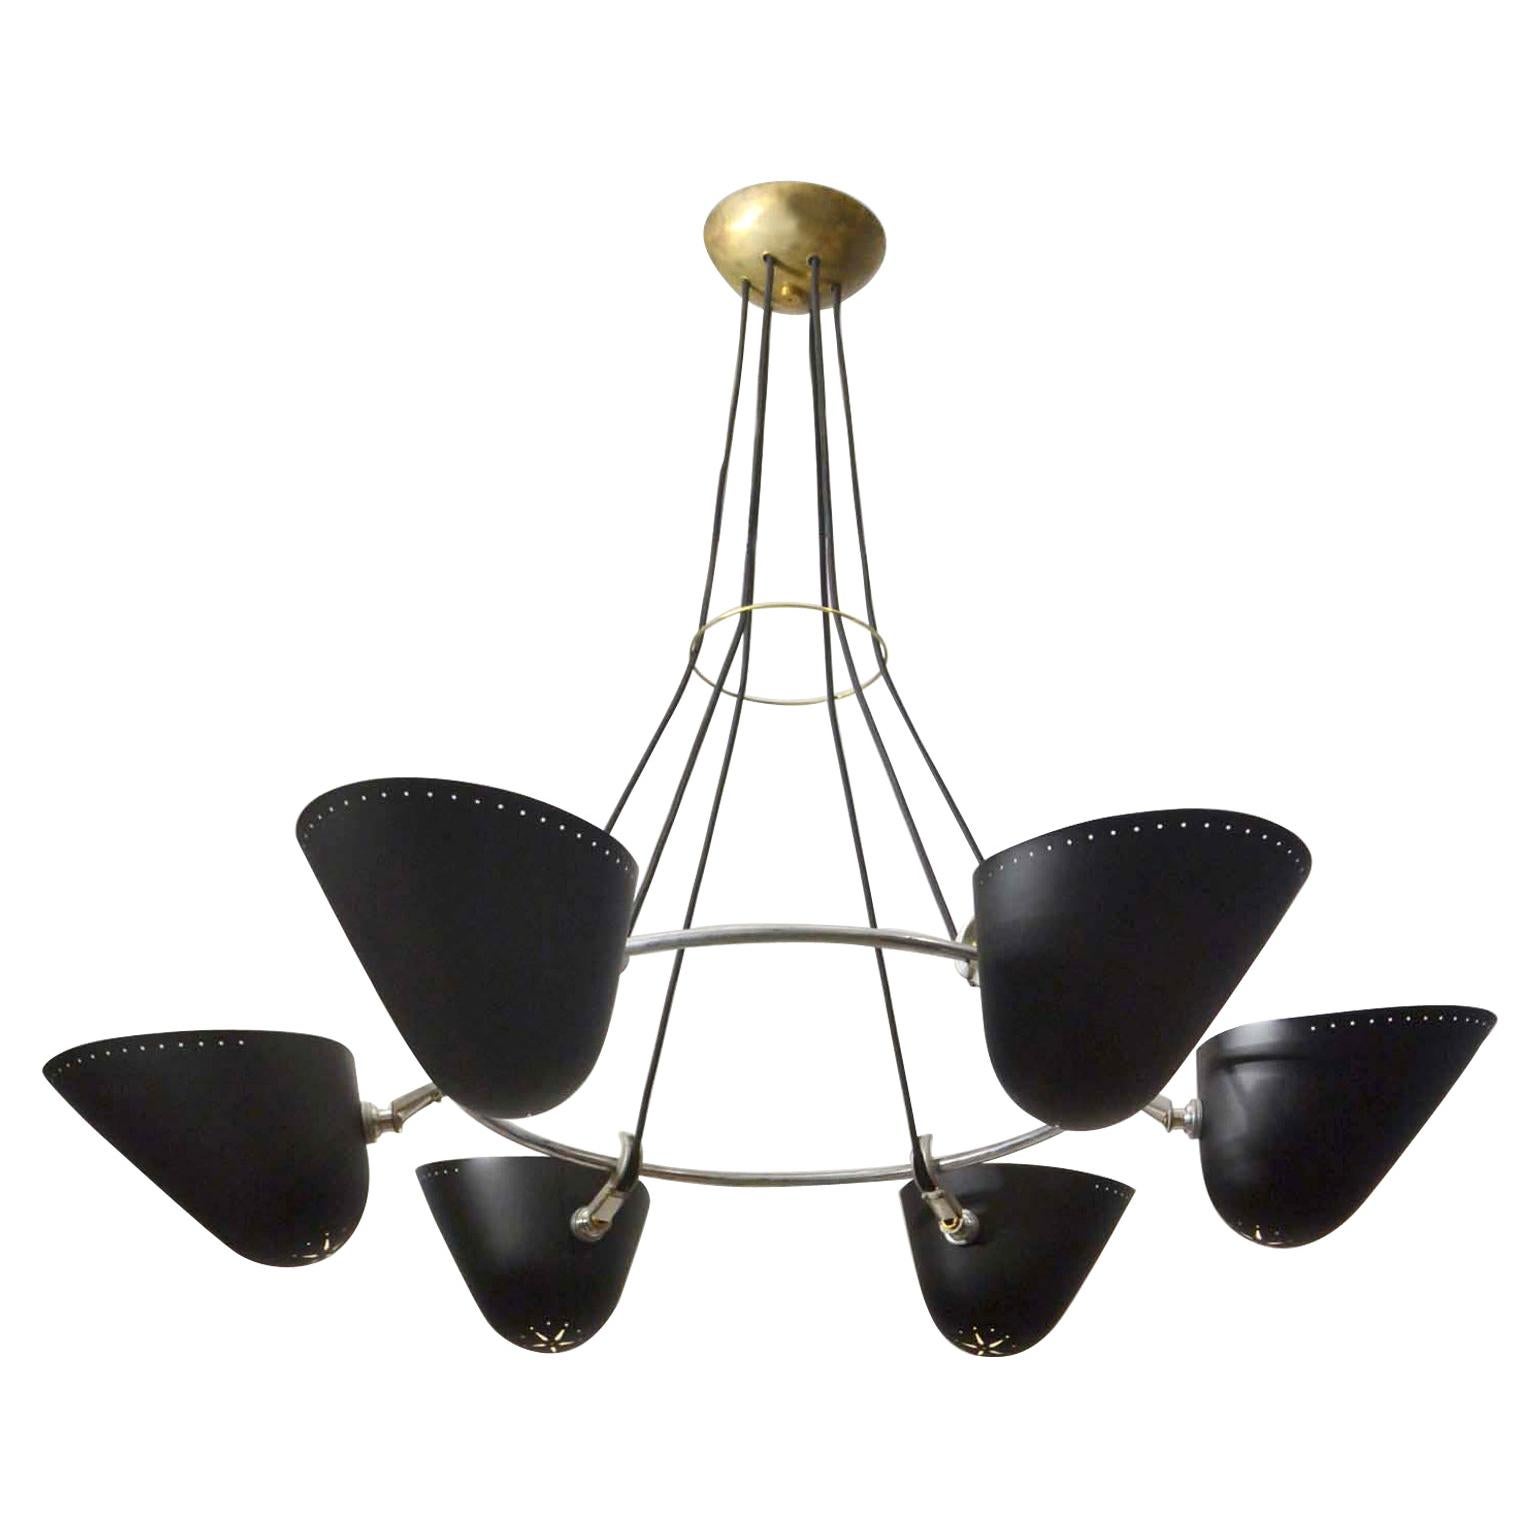 Pair of original Mid-Century Modern chandeliers, six black metal perforated shades. They are attached to a nickel-plated ring connected with joints. A brass ring holds the cords together and leads to a brass ceiling rose which gives the chandeliers